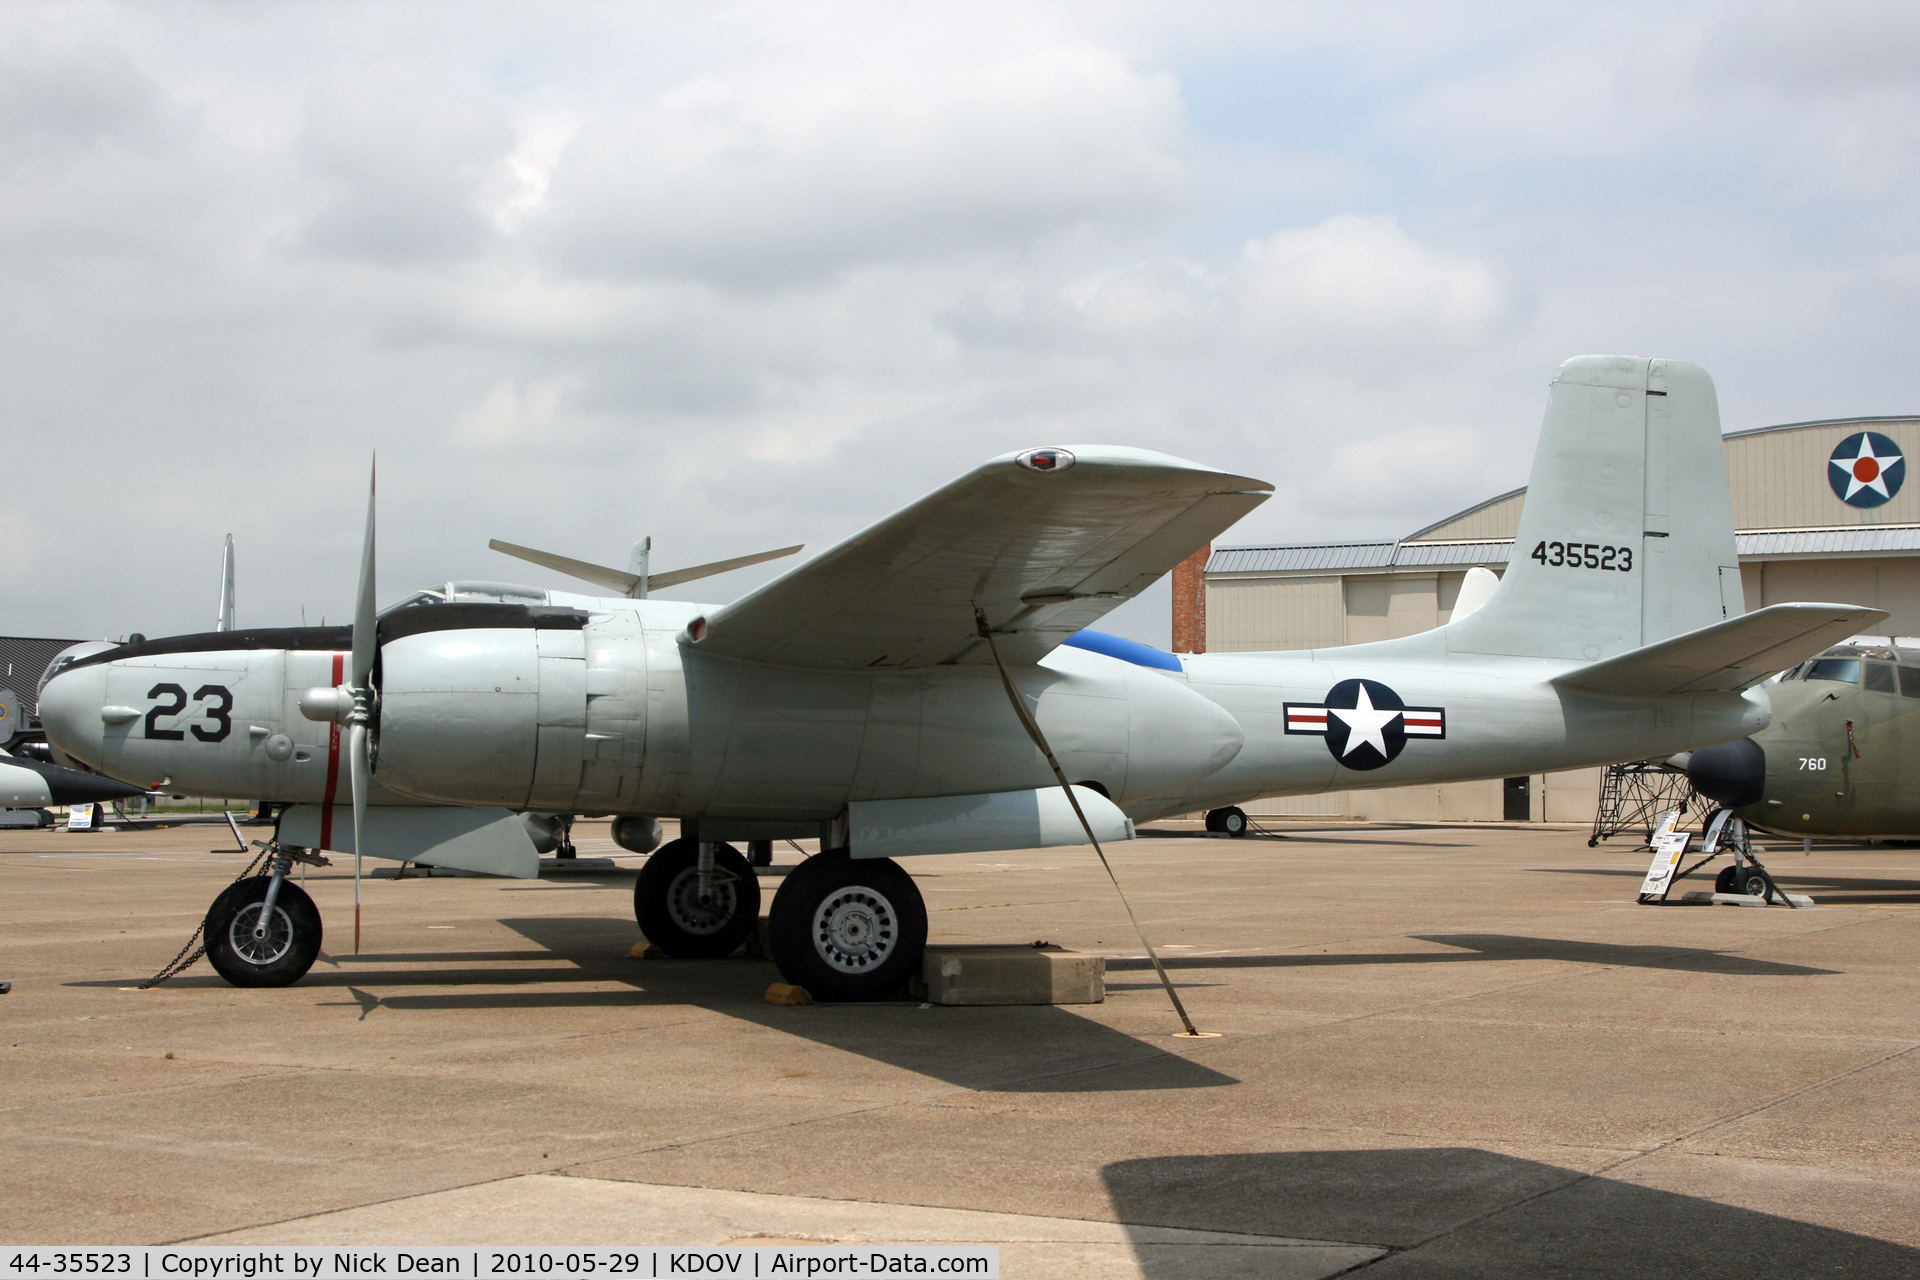 44-35523, 1944 Douglas A-26C Invader C/N 28802, KDOV (The profile created for this aircraft incorrectly states the C/N as the USAF s/n the OEM C/N is 28802 and not 44-35523 as stated)